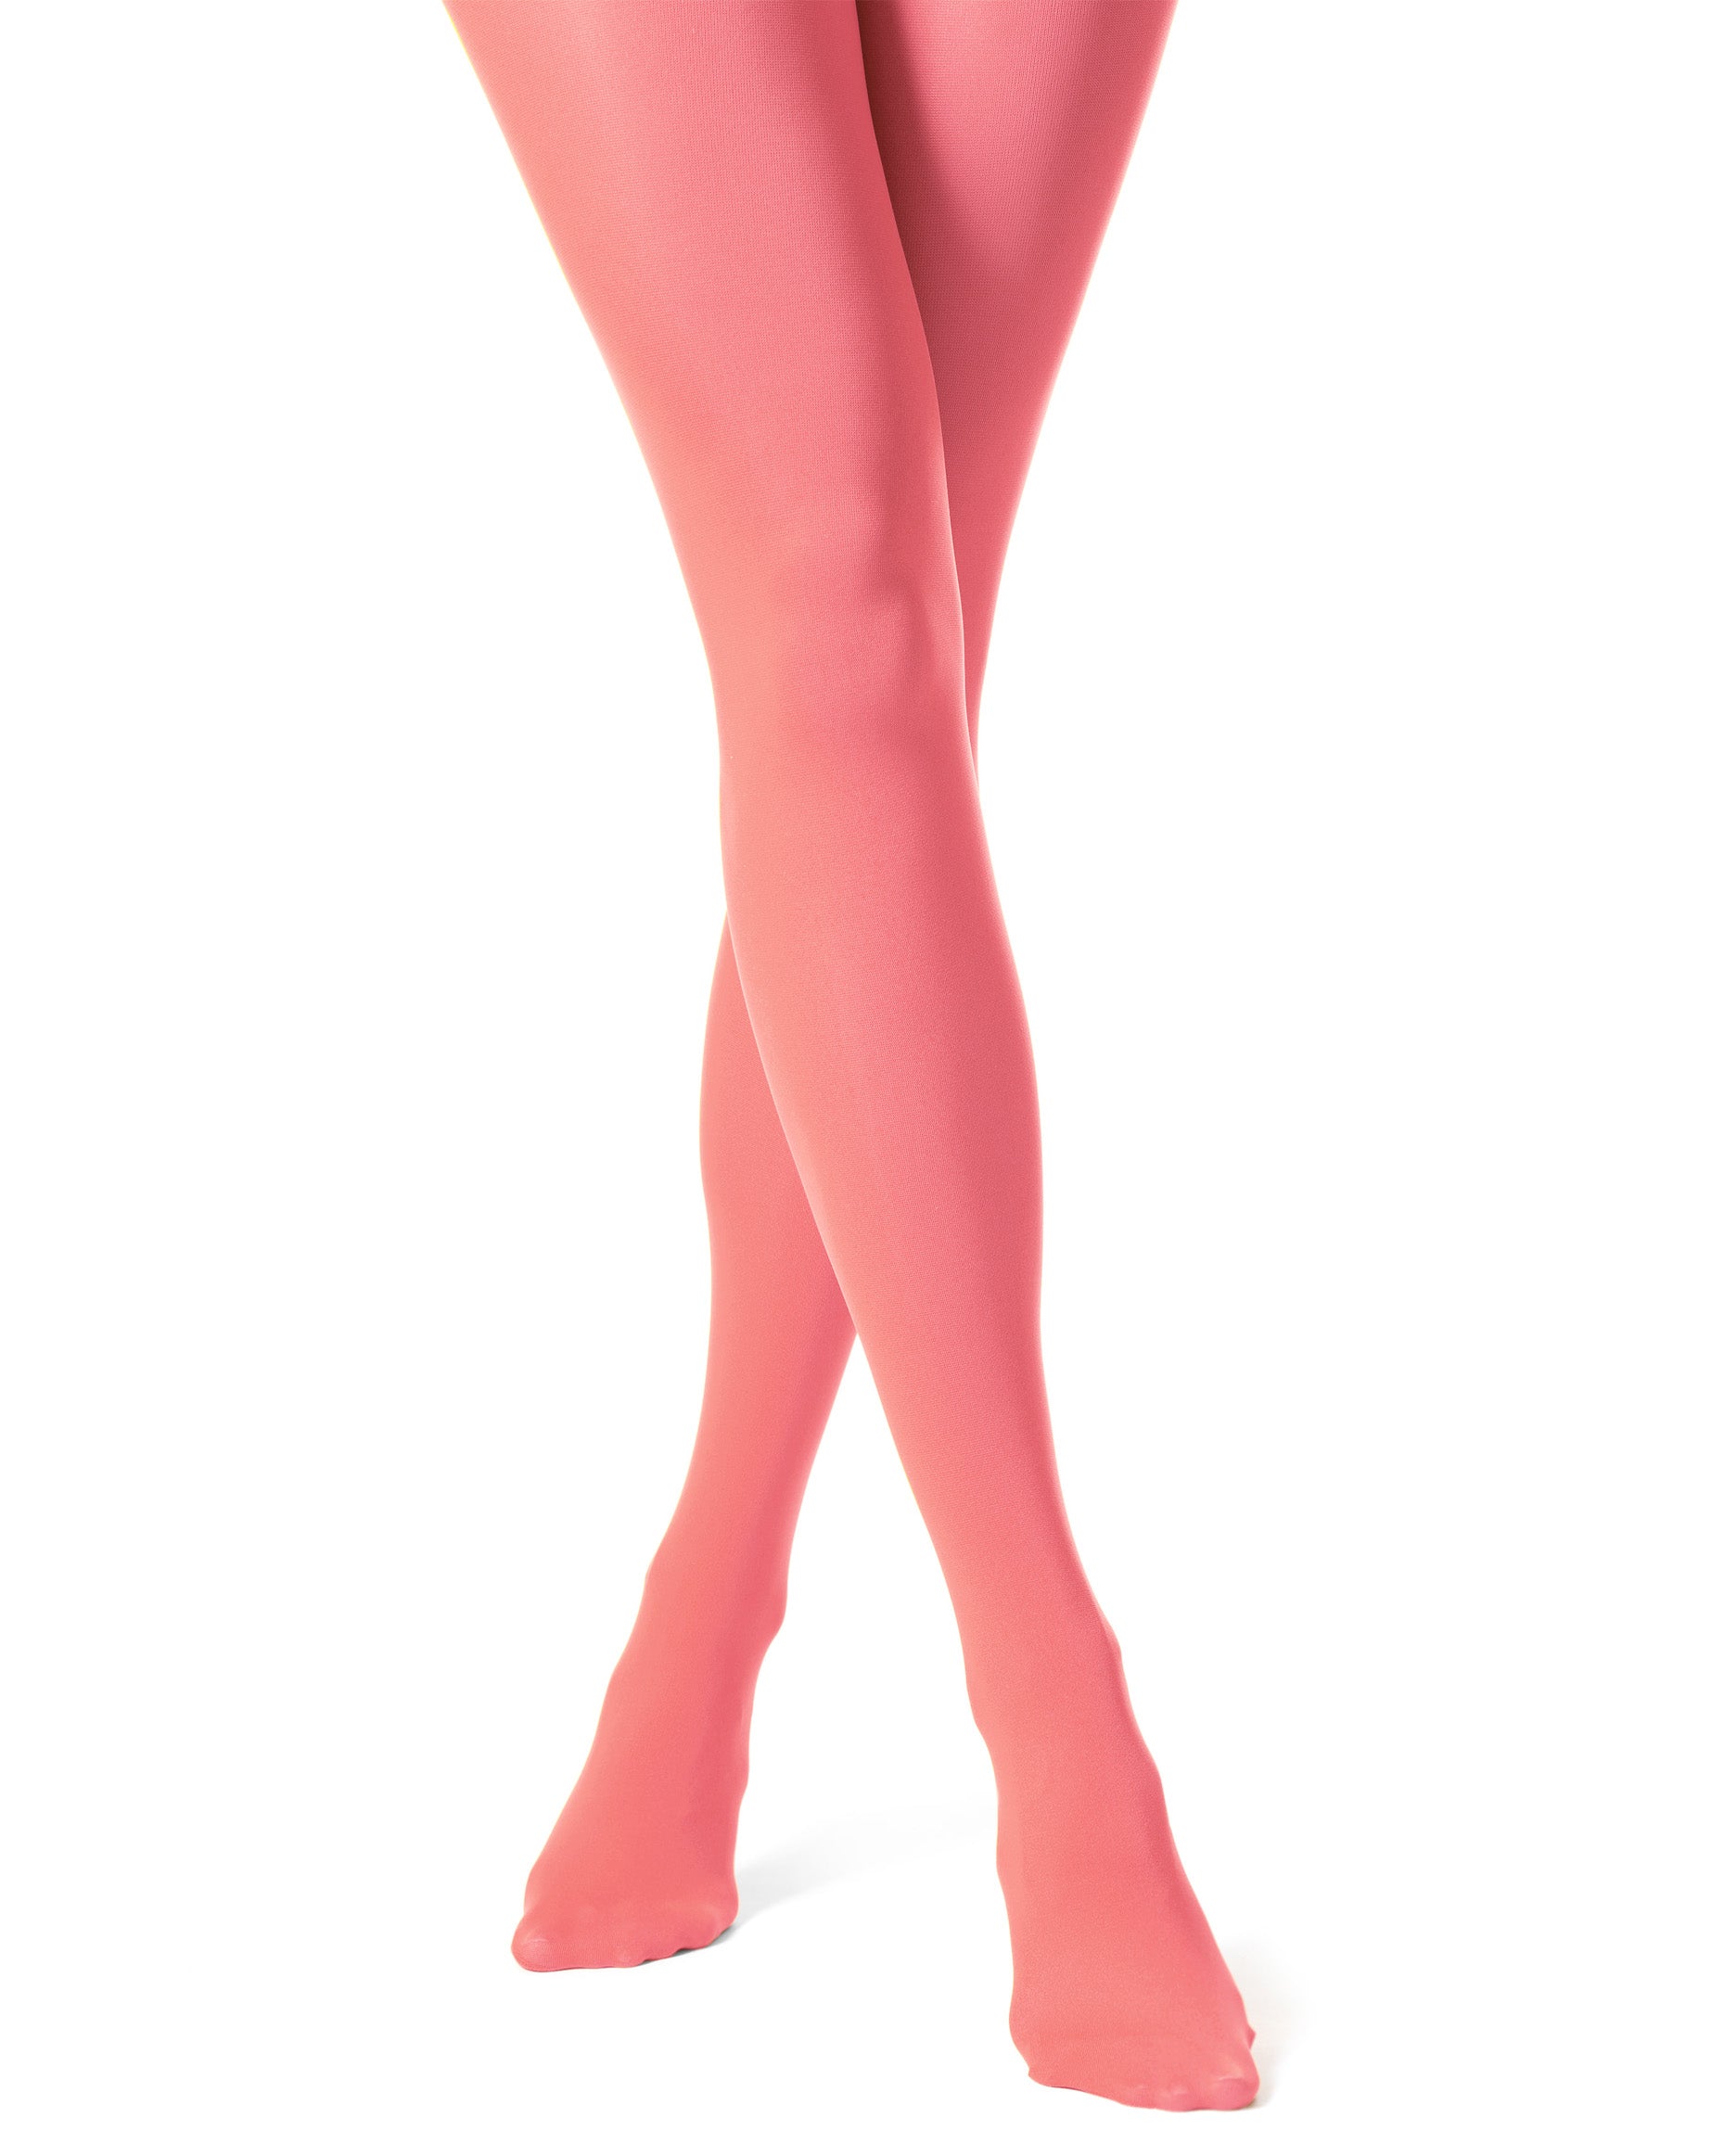 Trasparenze Sophie 70 Collant - coloured opaque tights in light salmon pink (flamingo)